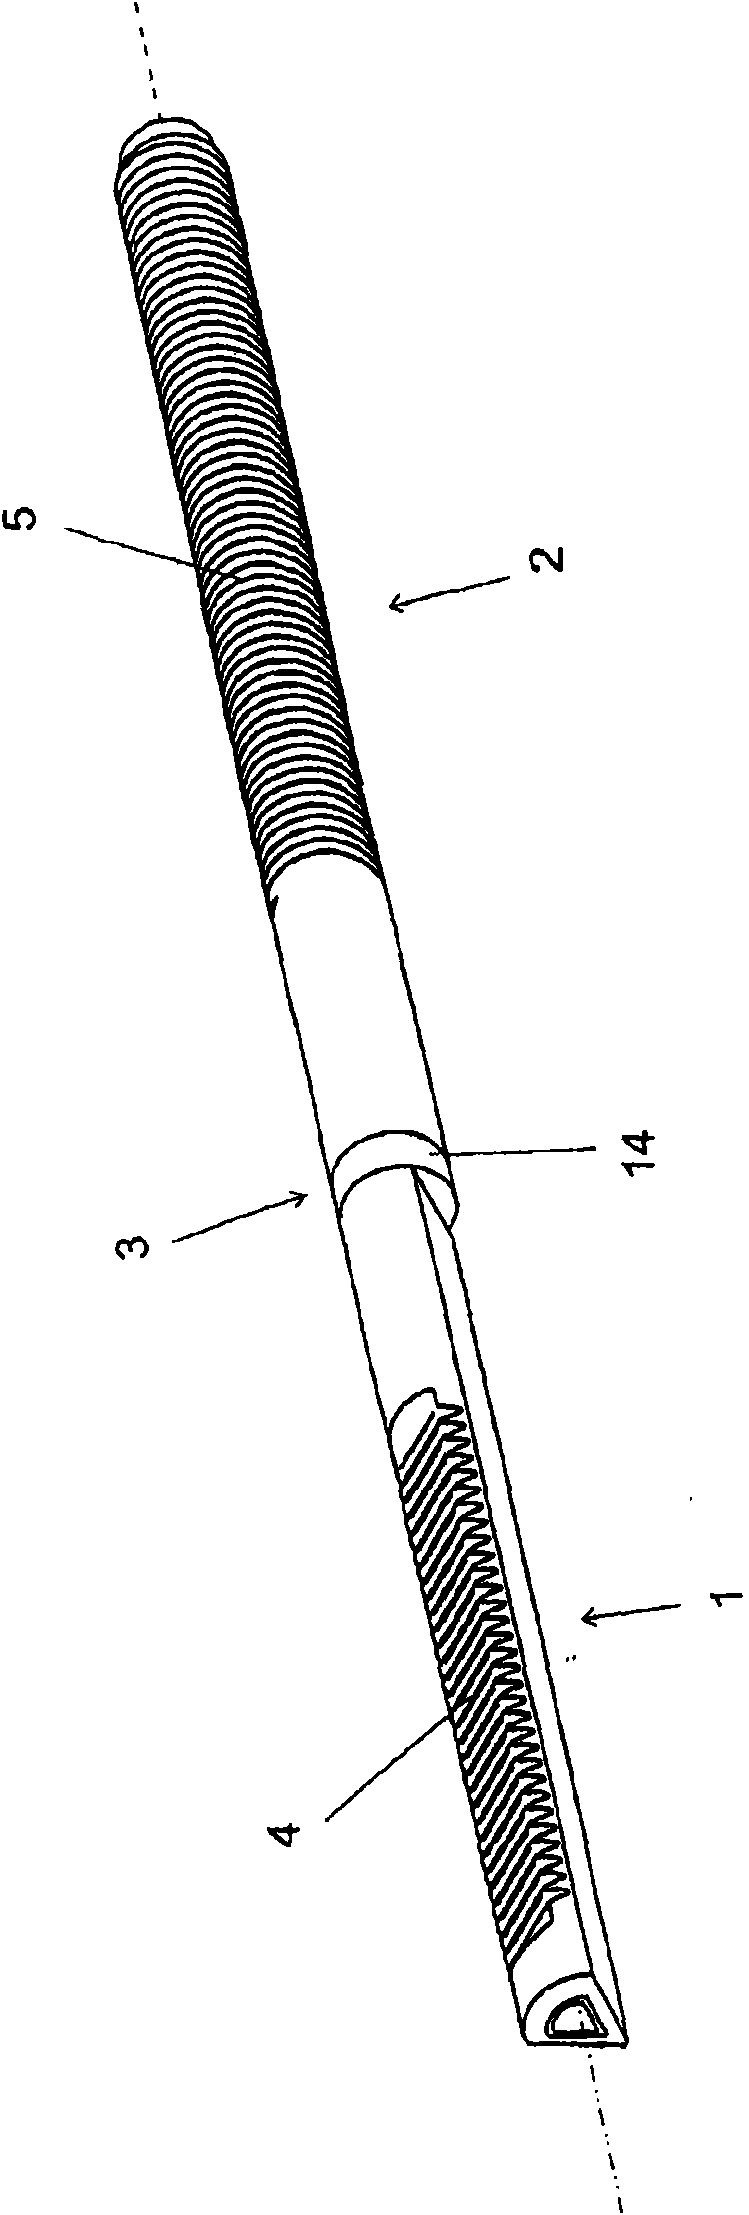 Toothed or threaded rod